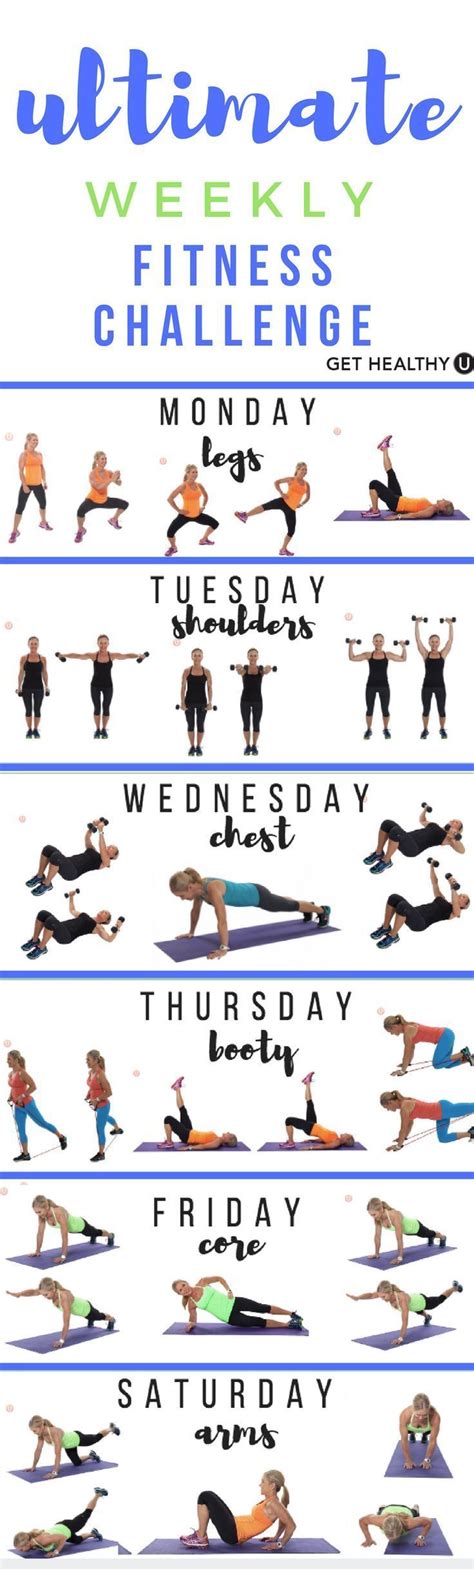 Ultimate Weekly Fitness Challenge Workout Challenge Fun Workouts